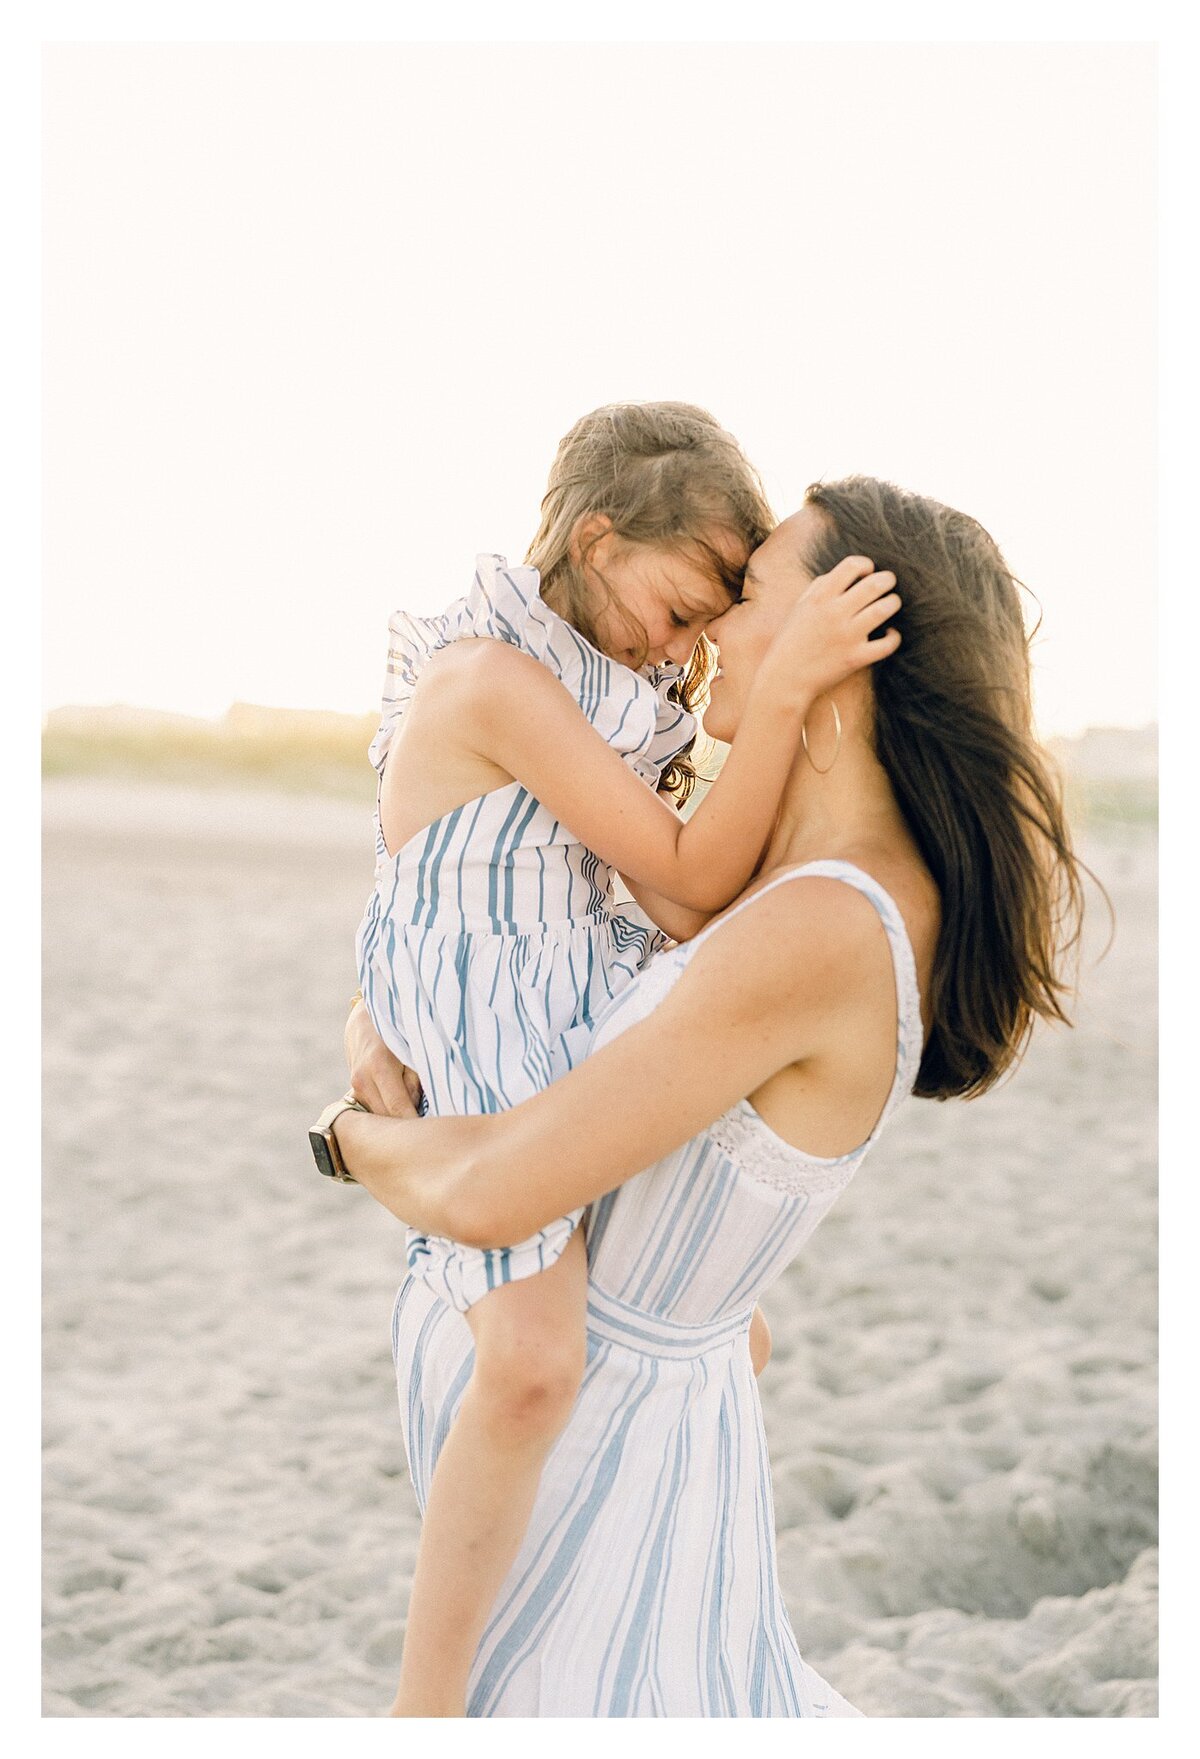 mother and daughter embrace on the beach at sunset